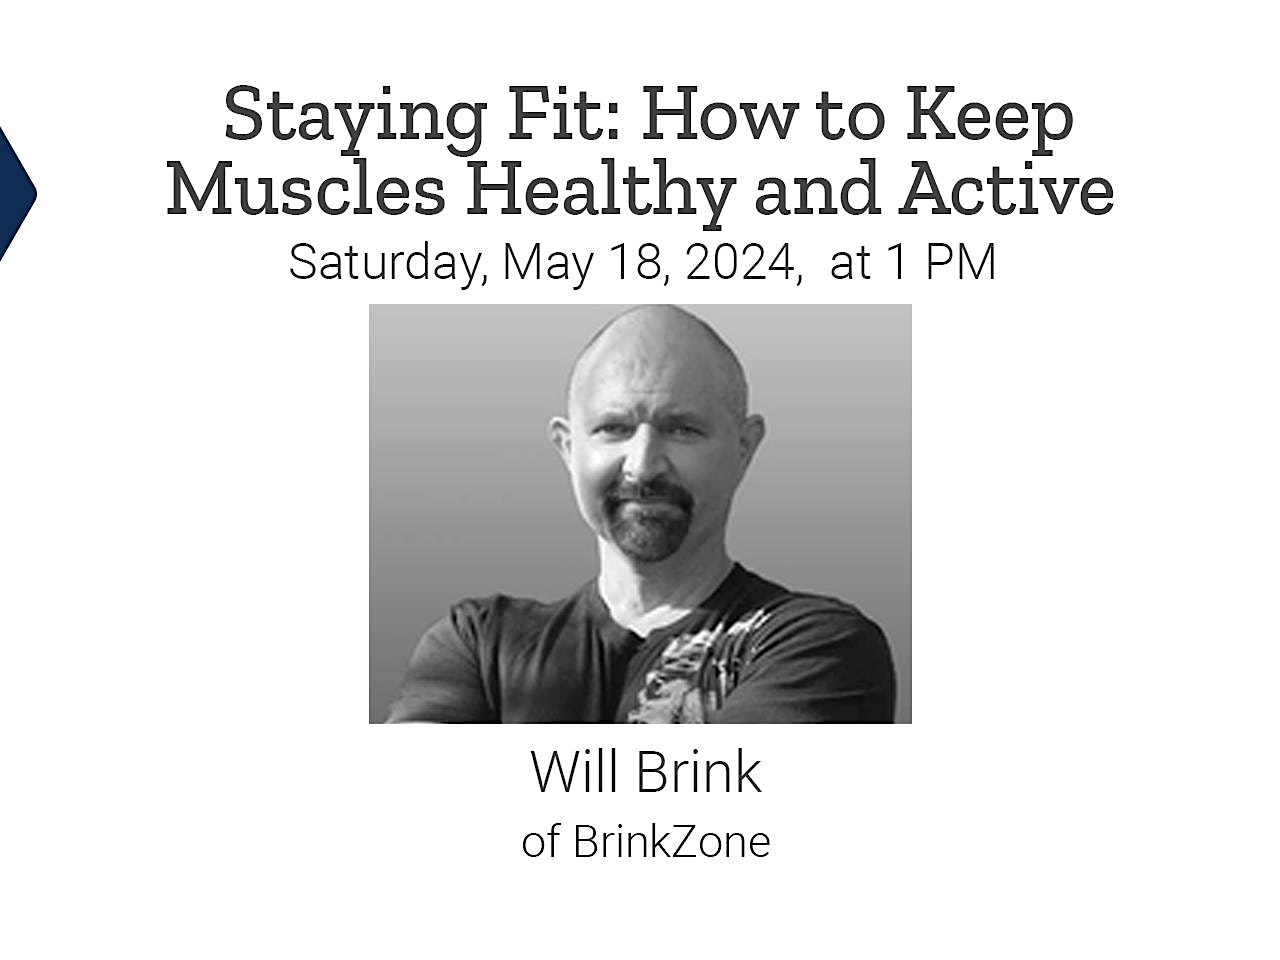 How to Keep Muscles Healthy and Active - FREE in-store lecture